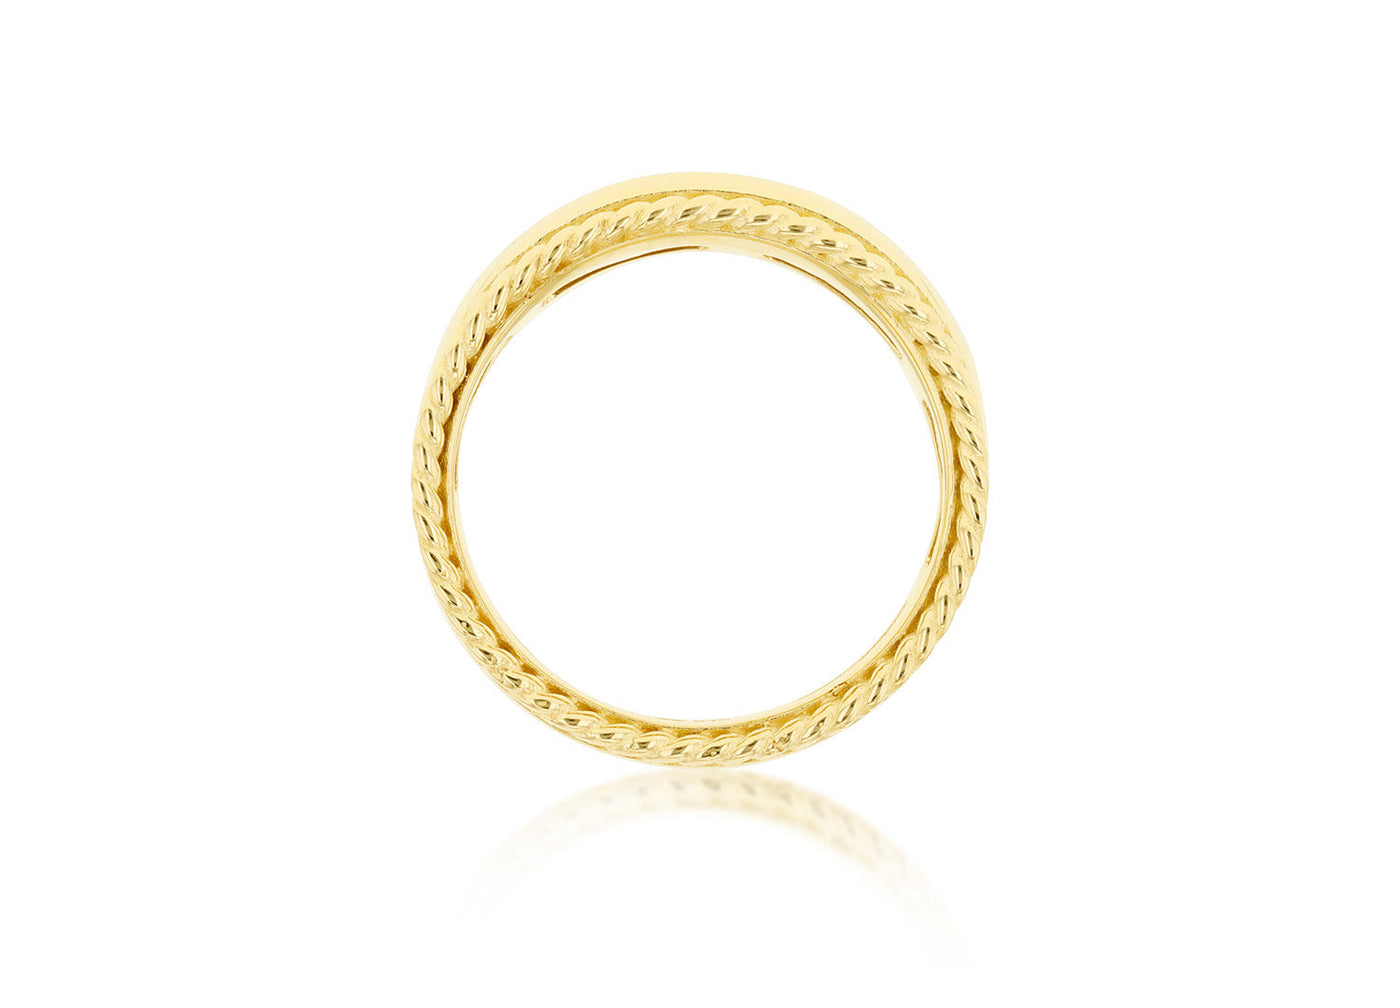 9K Yellow Gold Wide Rope Edge Ring